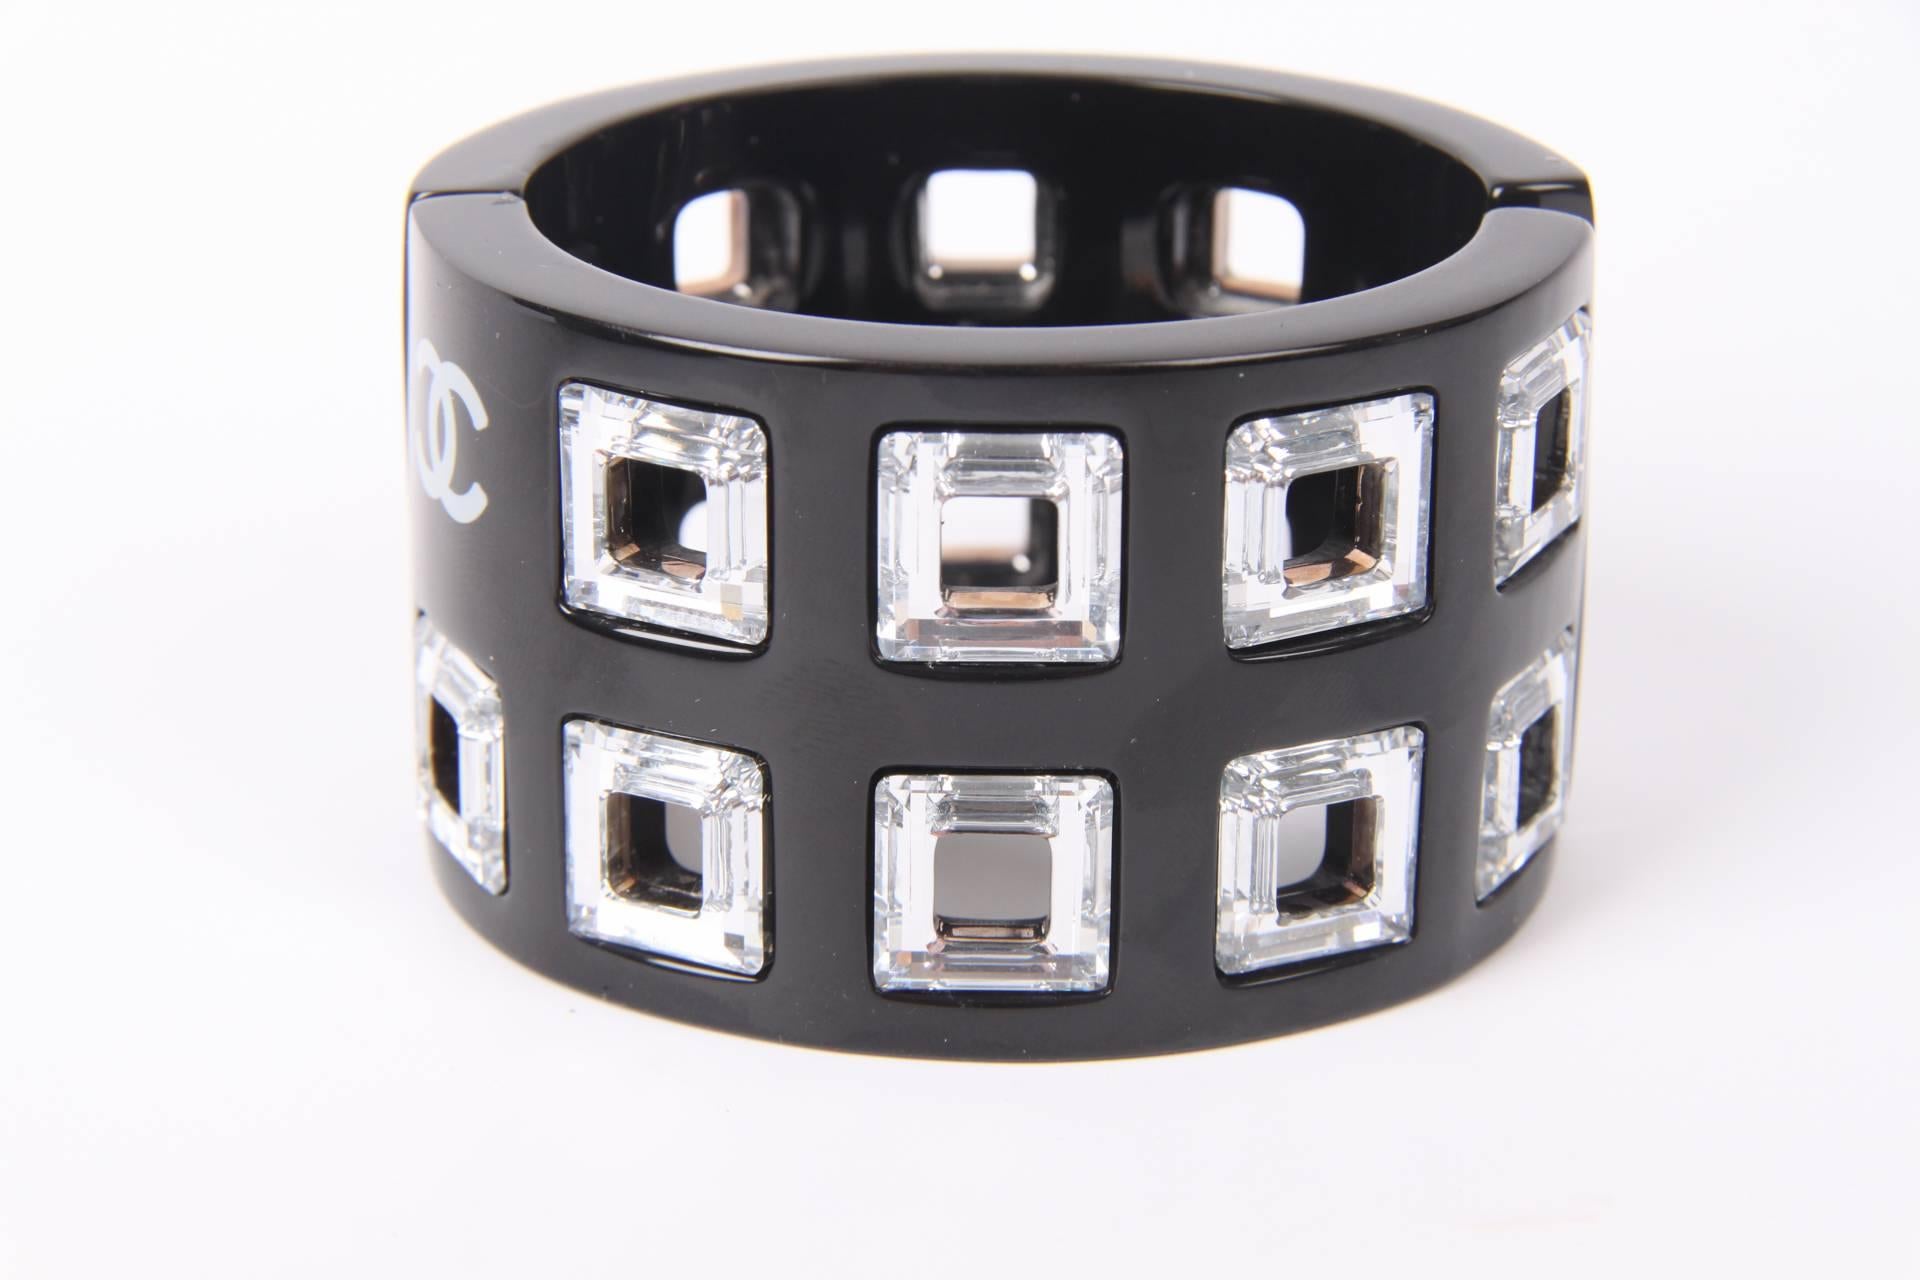 This bracelet in black and white is chic and timeless. Chanel calls this collection Black & White Crystal Cube, it's from the 2006 Cruise Collection.

Made of black resin and covered with white square crystals that measure 1,5 x 1,5 centimeters.